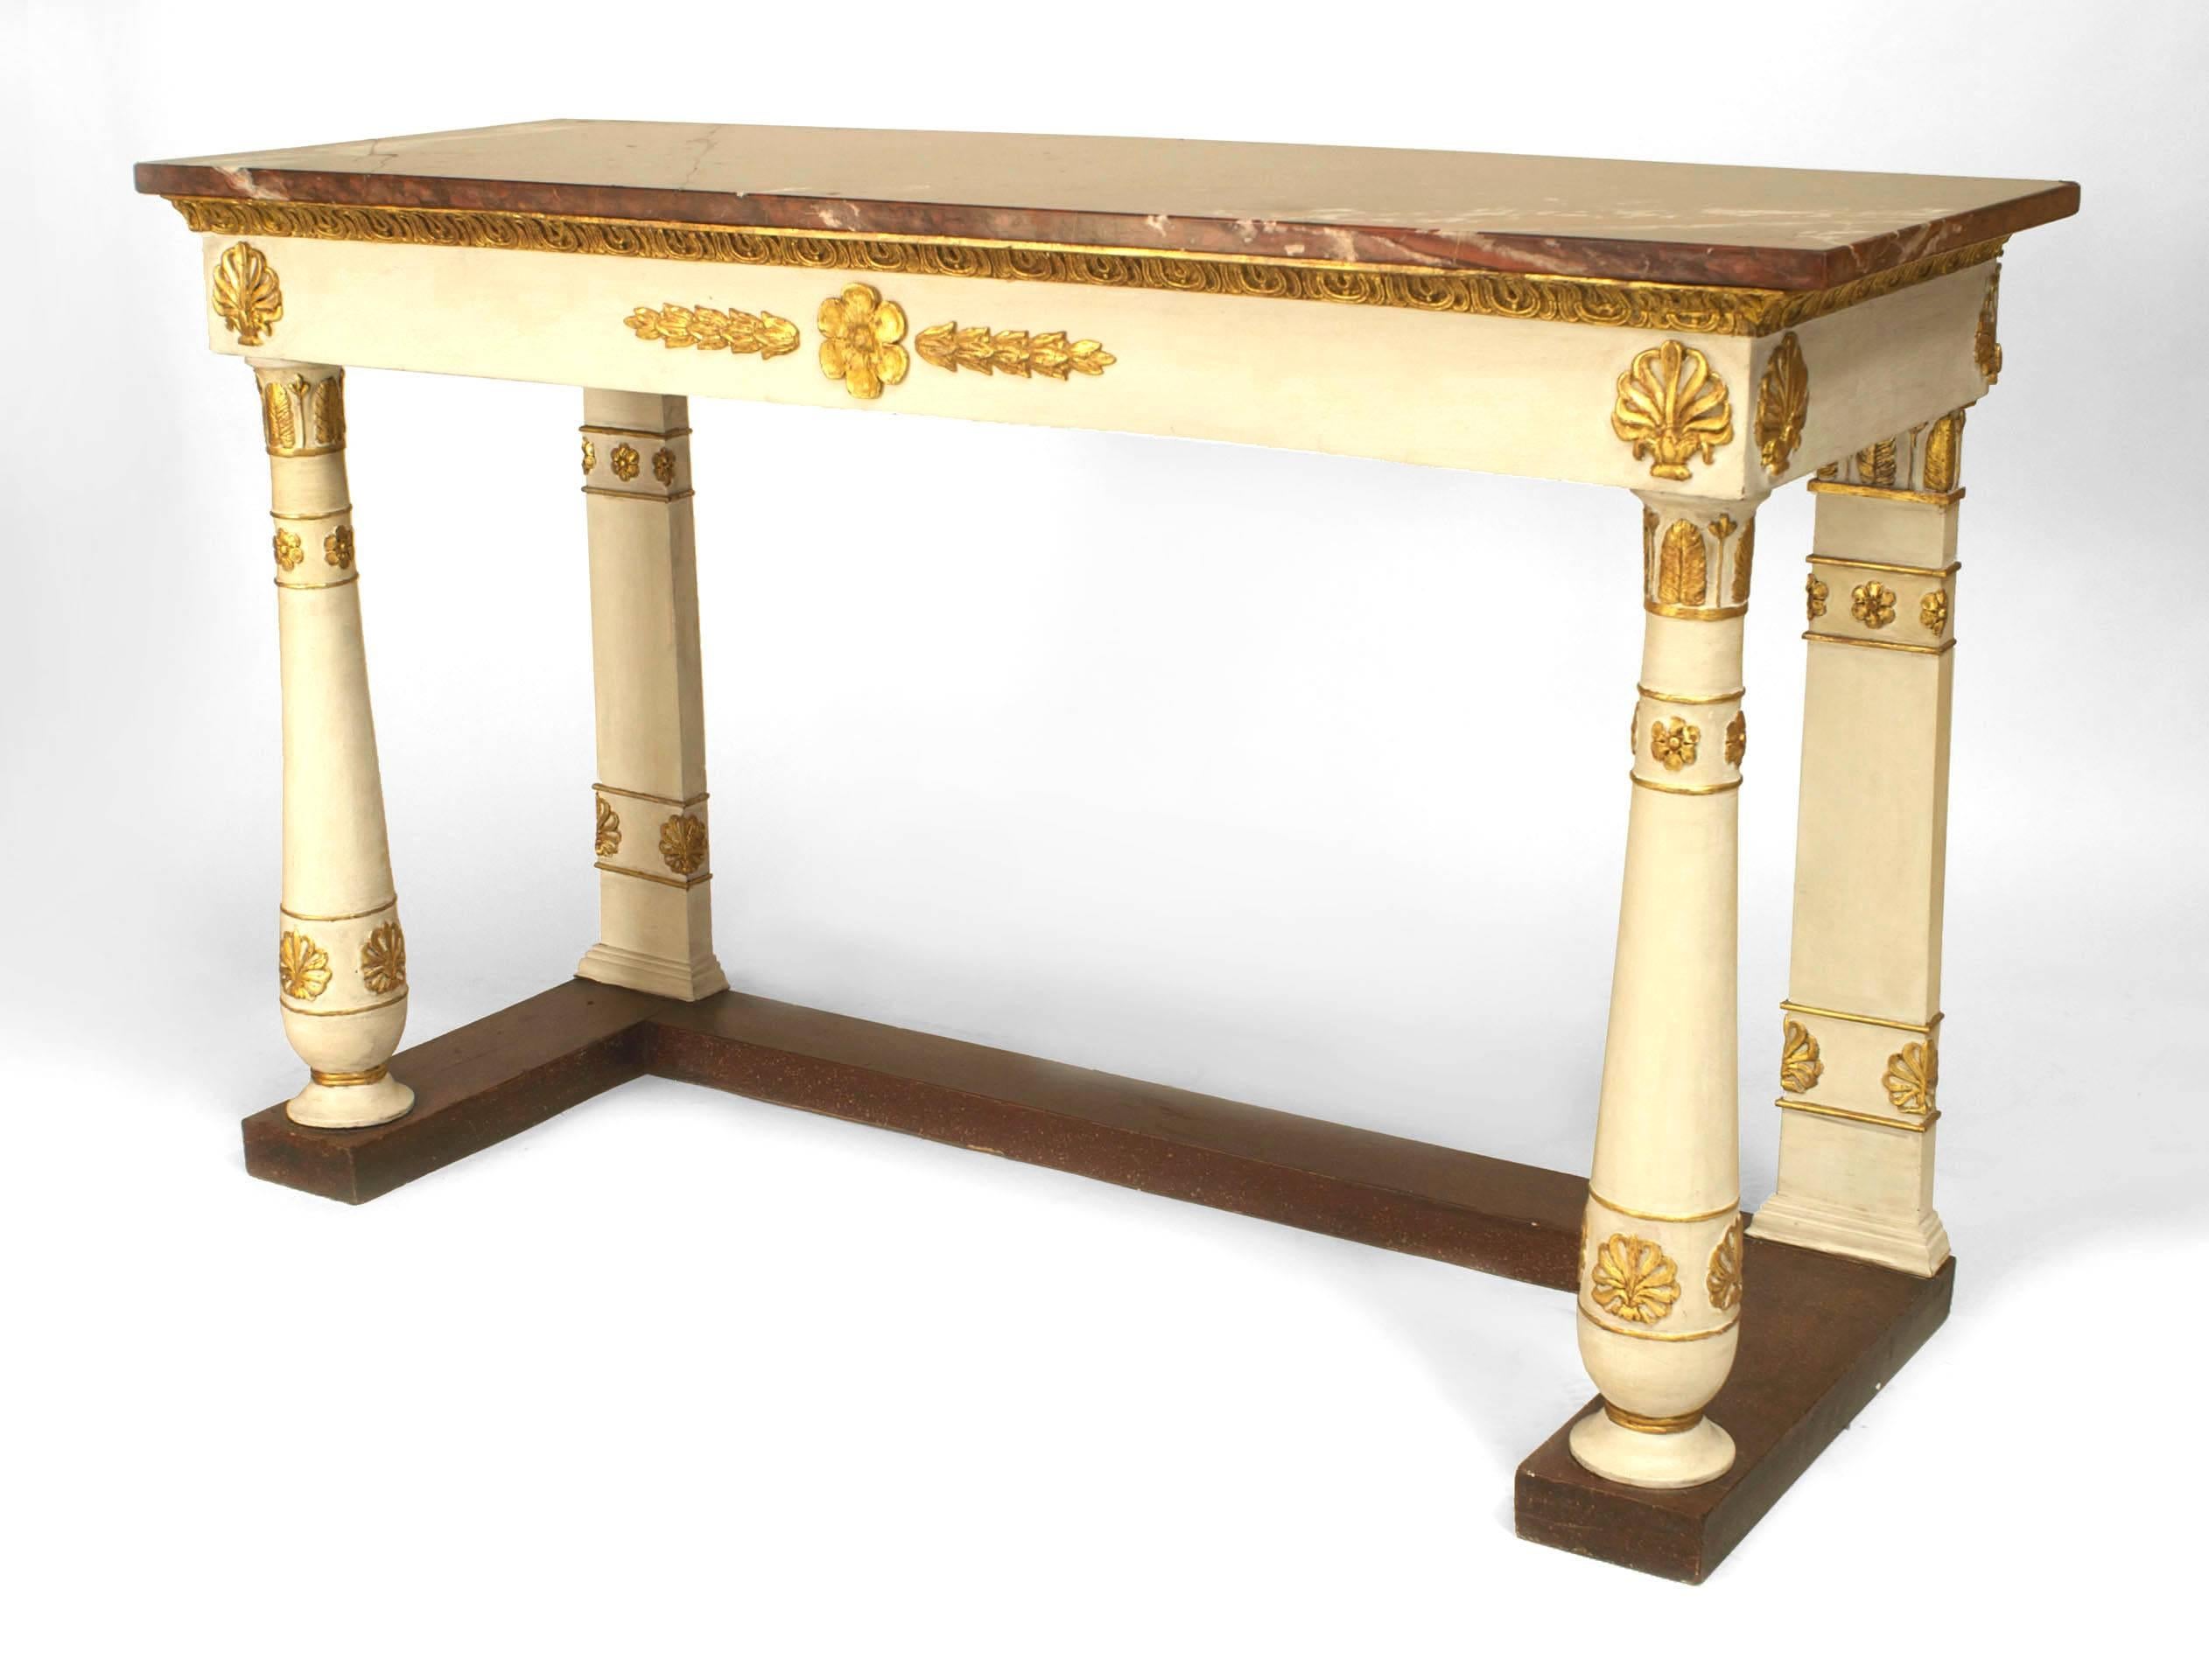 Italian Neo-classic (18/19th Century) white painted and gilt carved trim console table with a faux porphyry painted platform base and a rouge marble top.
